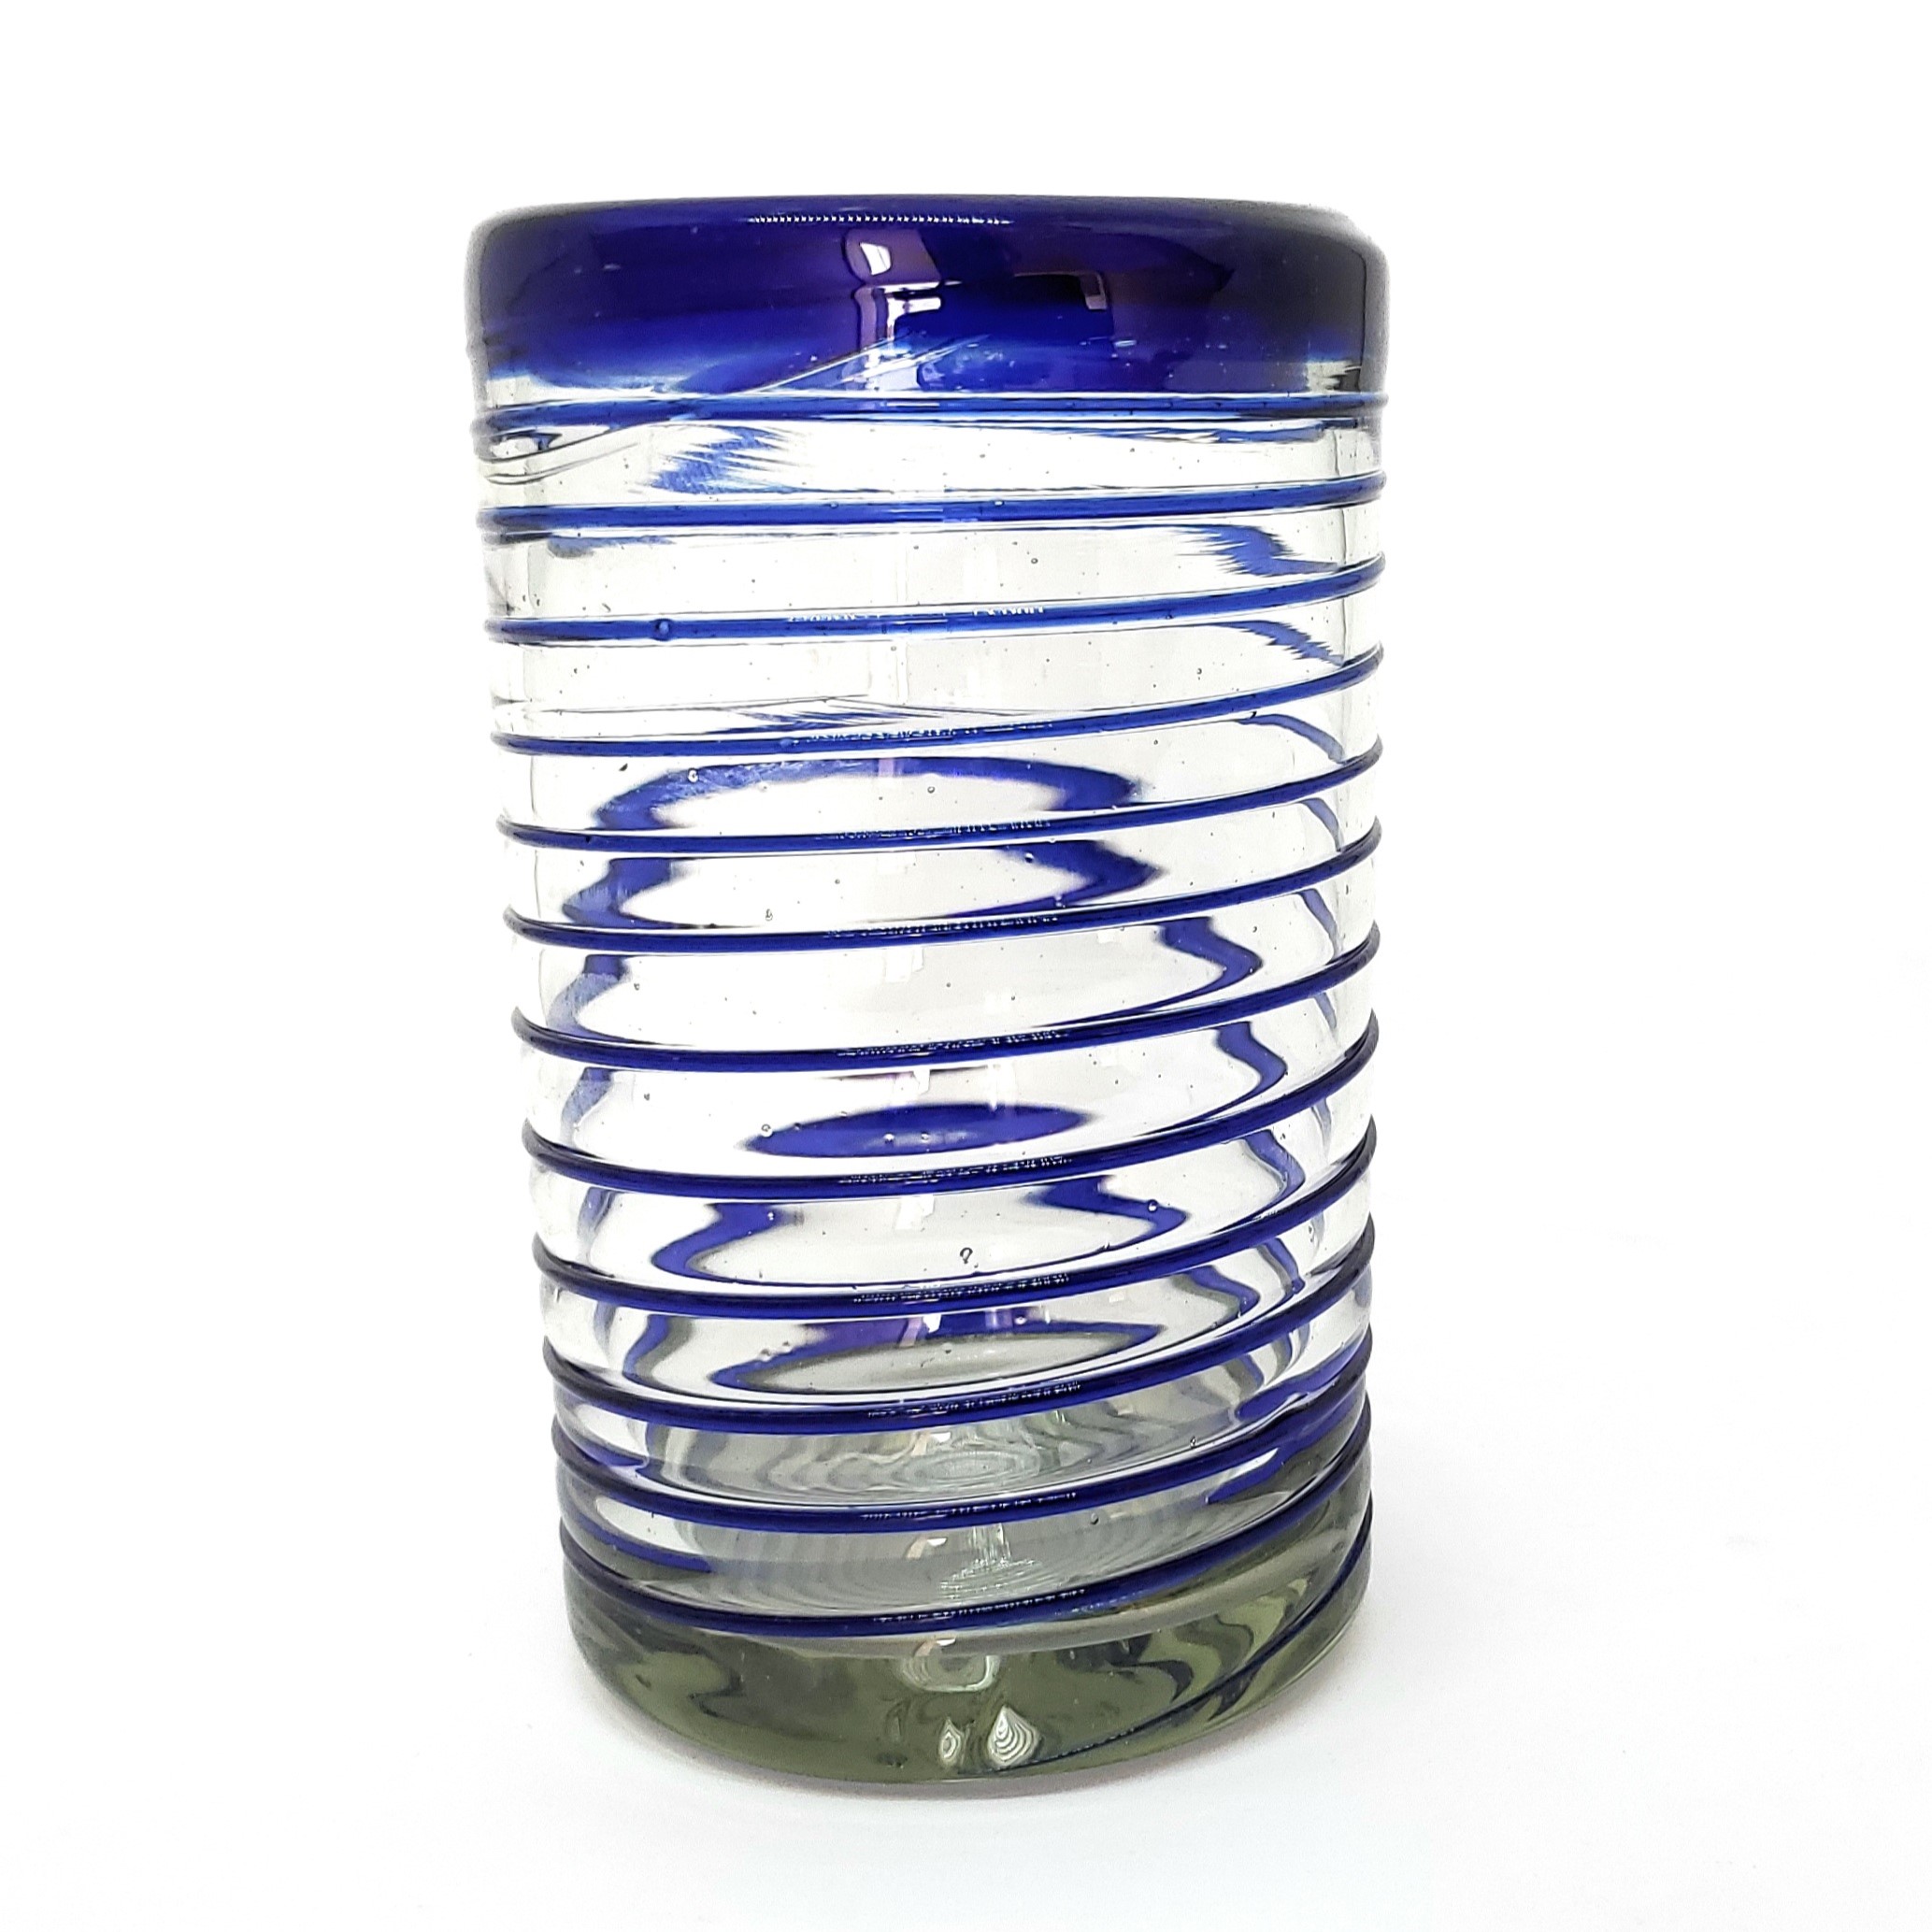 Wholesale MEXICAN GLASSWARE / Cobalt Blue Spiral 14 oz Drinking Glasses  / These elegant glasses covered in a cobalt blue spiral will add a handcrafted touch to your kitchen decor.